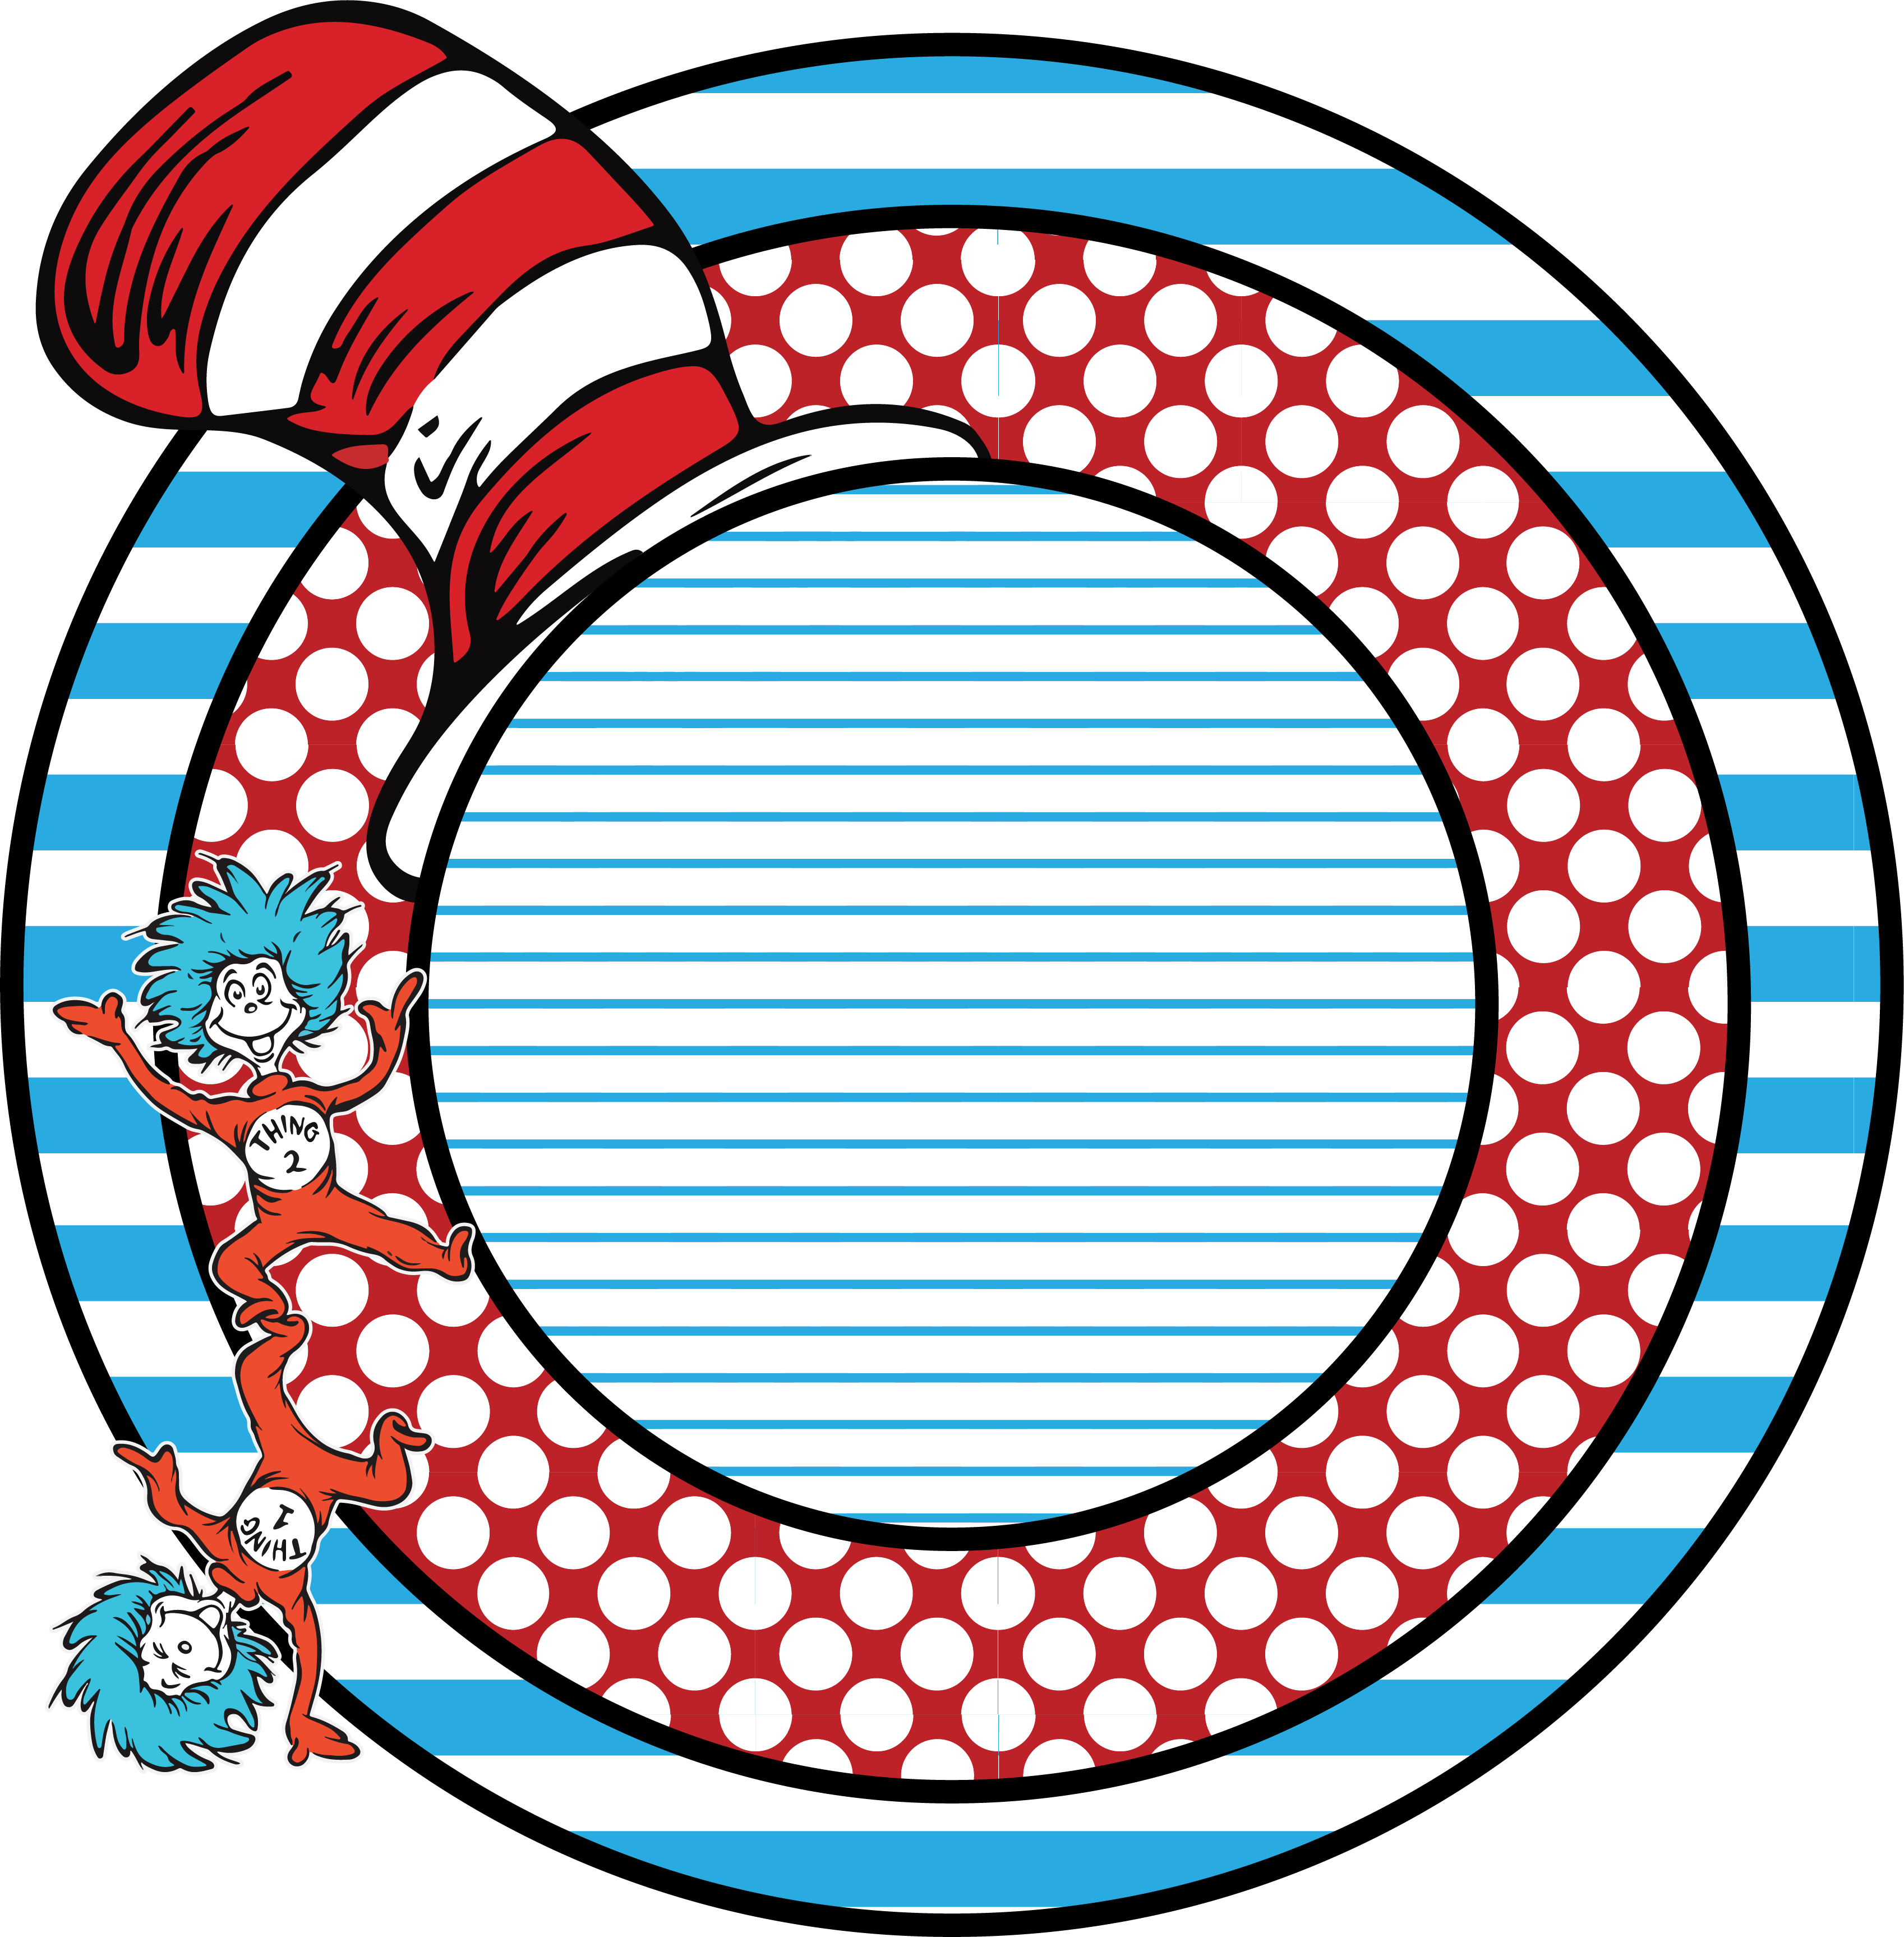 Seuss Reading Across America Day Transfers 炎 輪 フリー 素材 3395x3453 Png Clipart Download